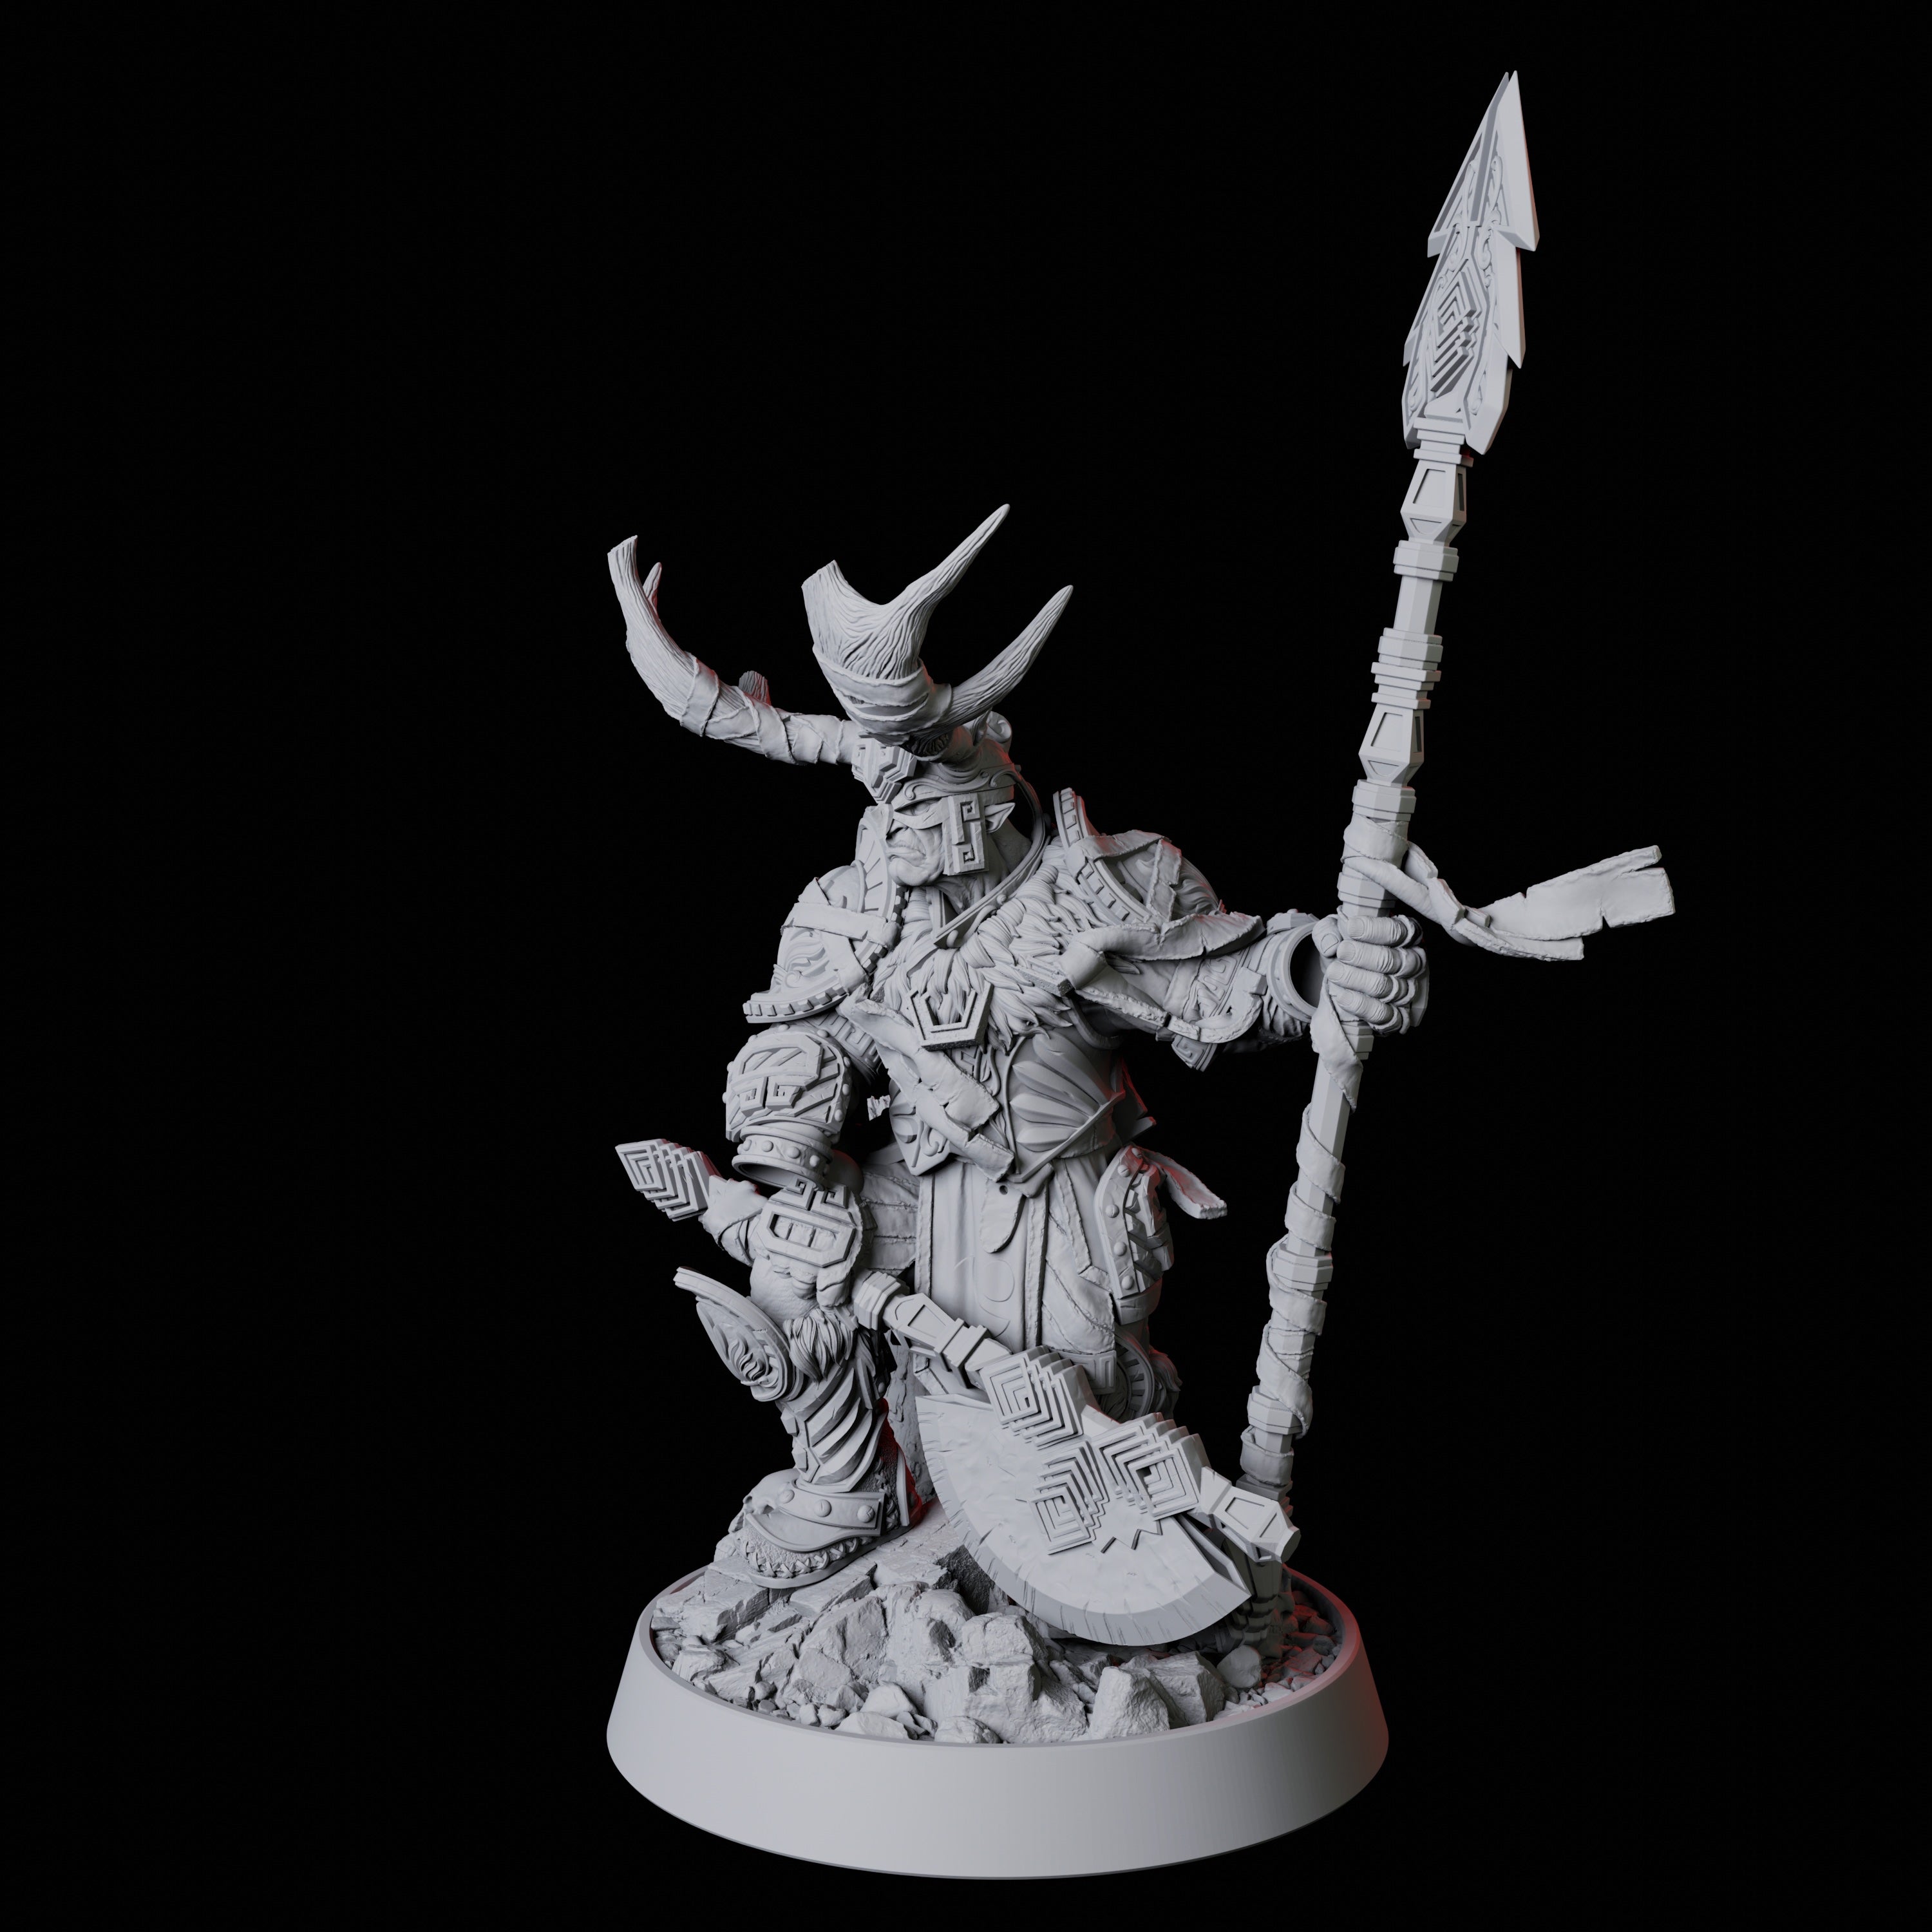 Warrior Druid Miniature for Dungeons and Dragons